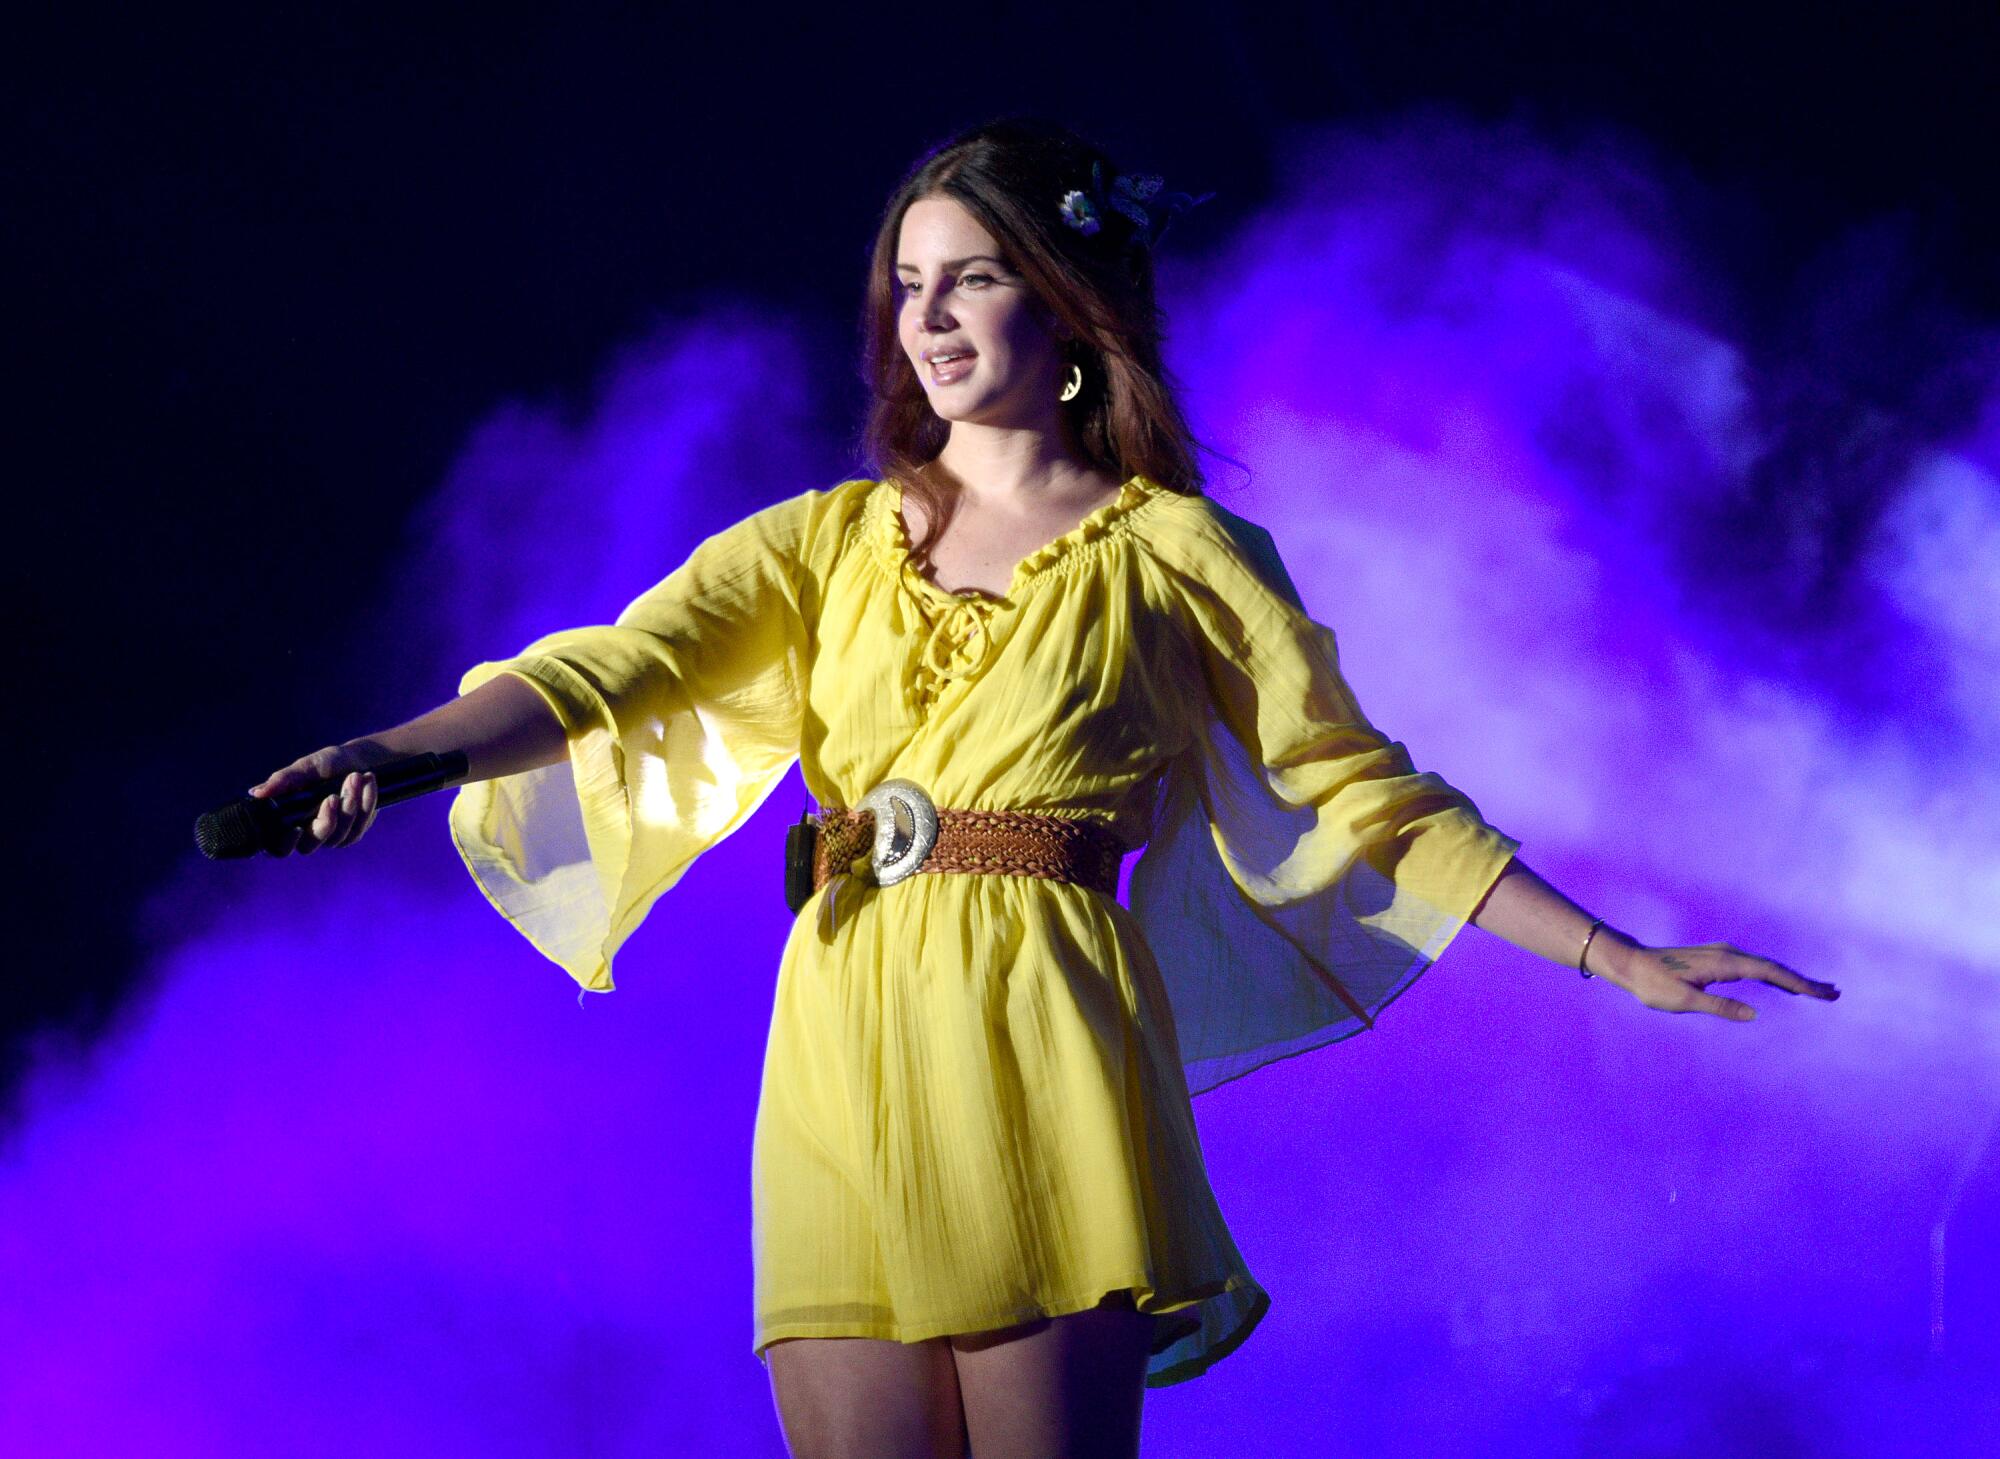 How Lana Del Rey reinvented herself, and rock stardom - Los Angeles Times